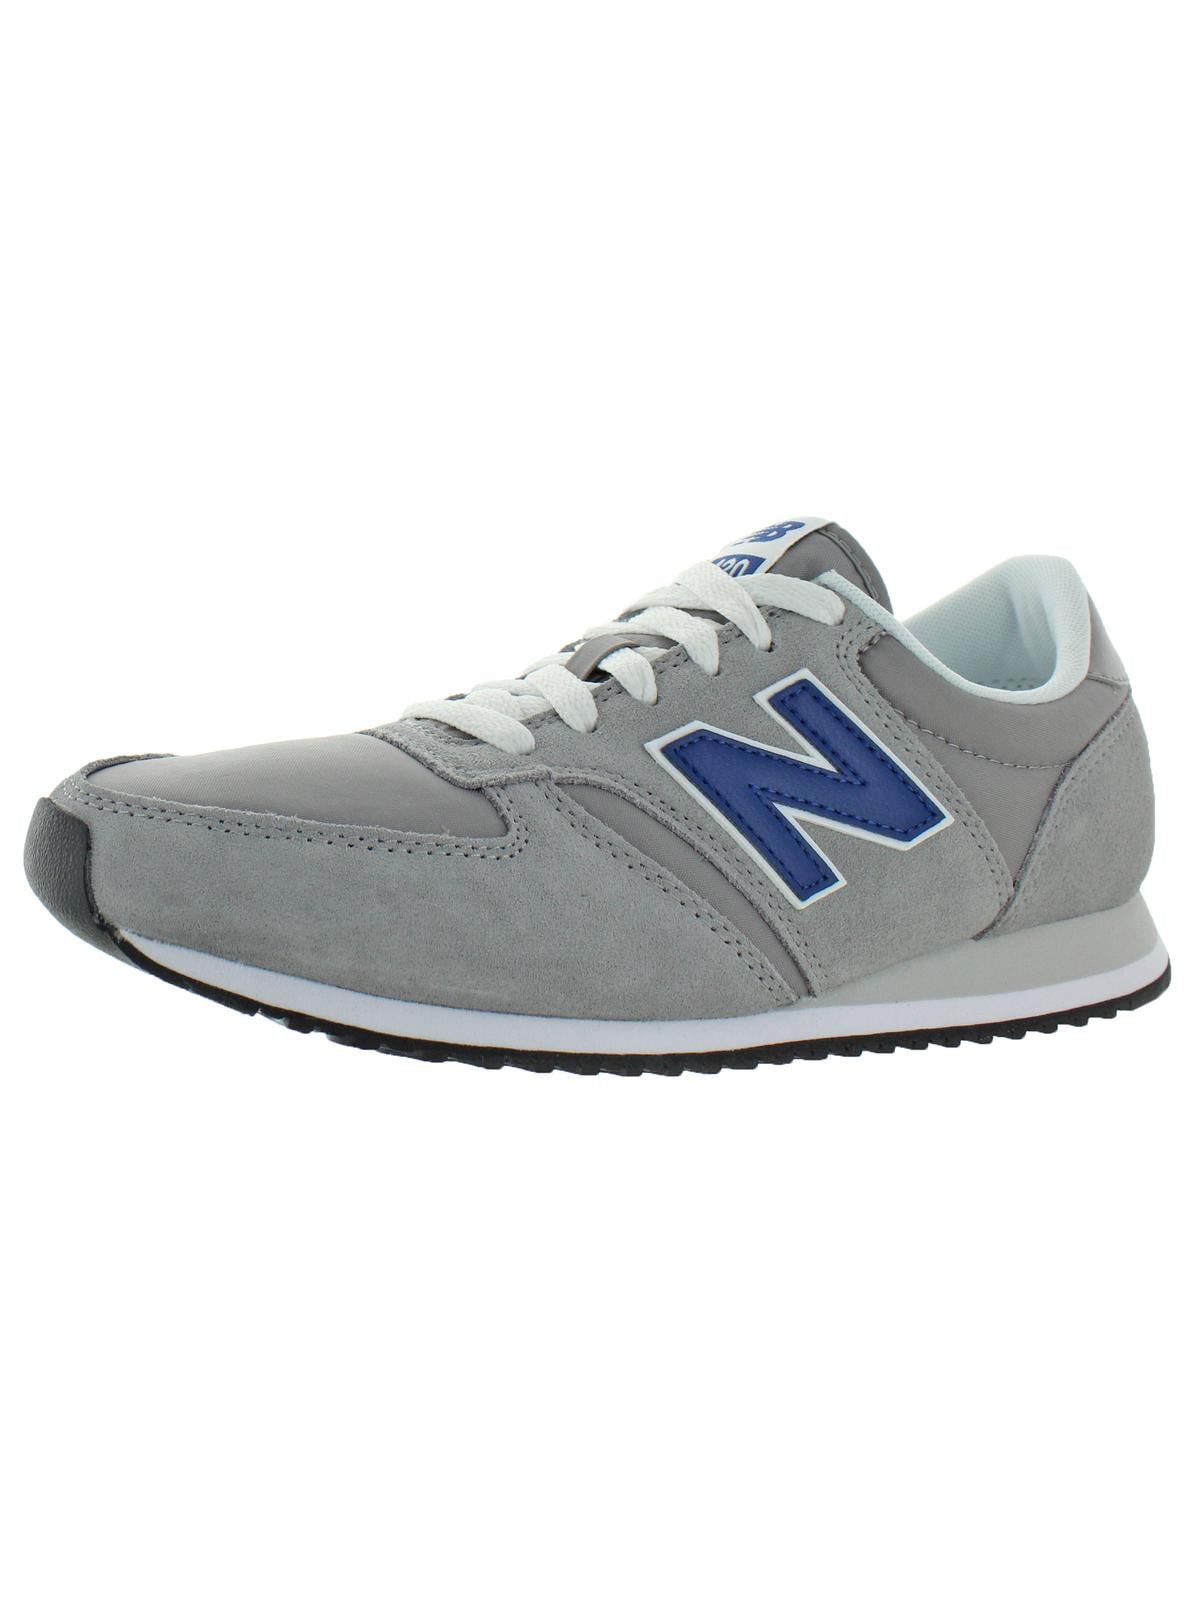 new balance 420 cream suede trainers